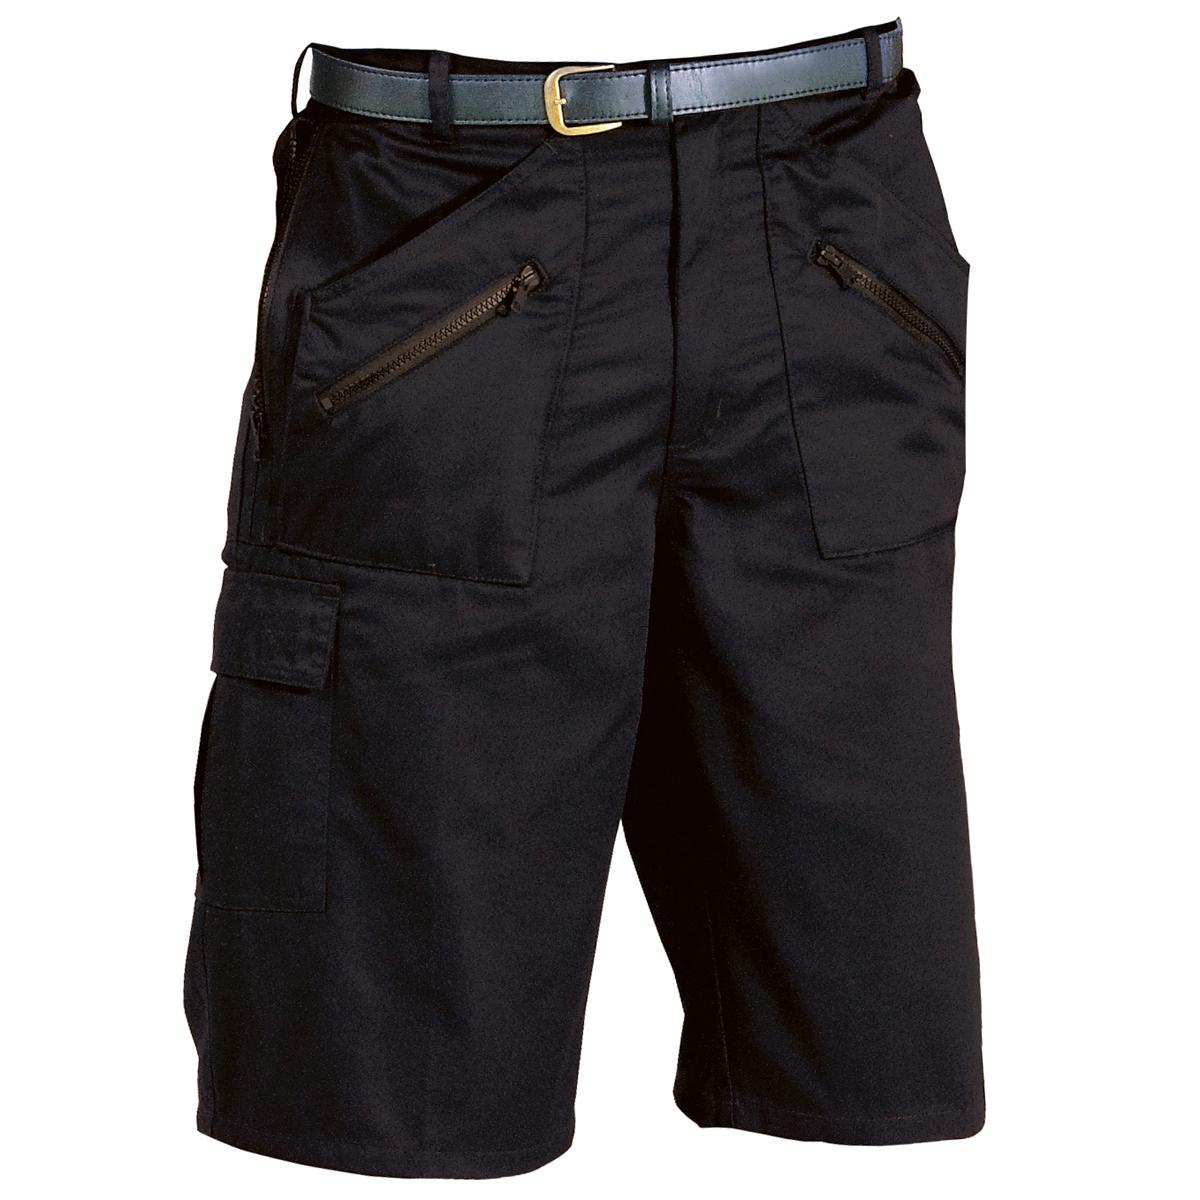 Men's action shorts with zipped pockets for security.